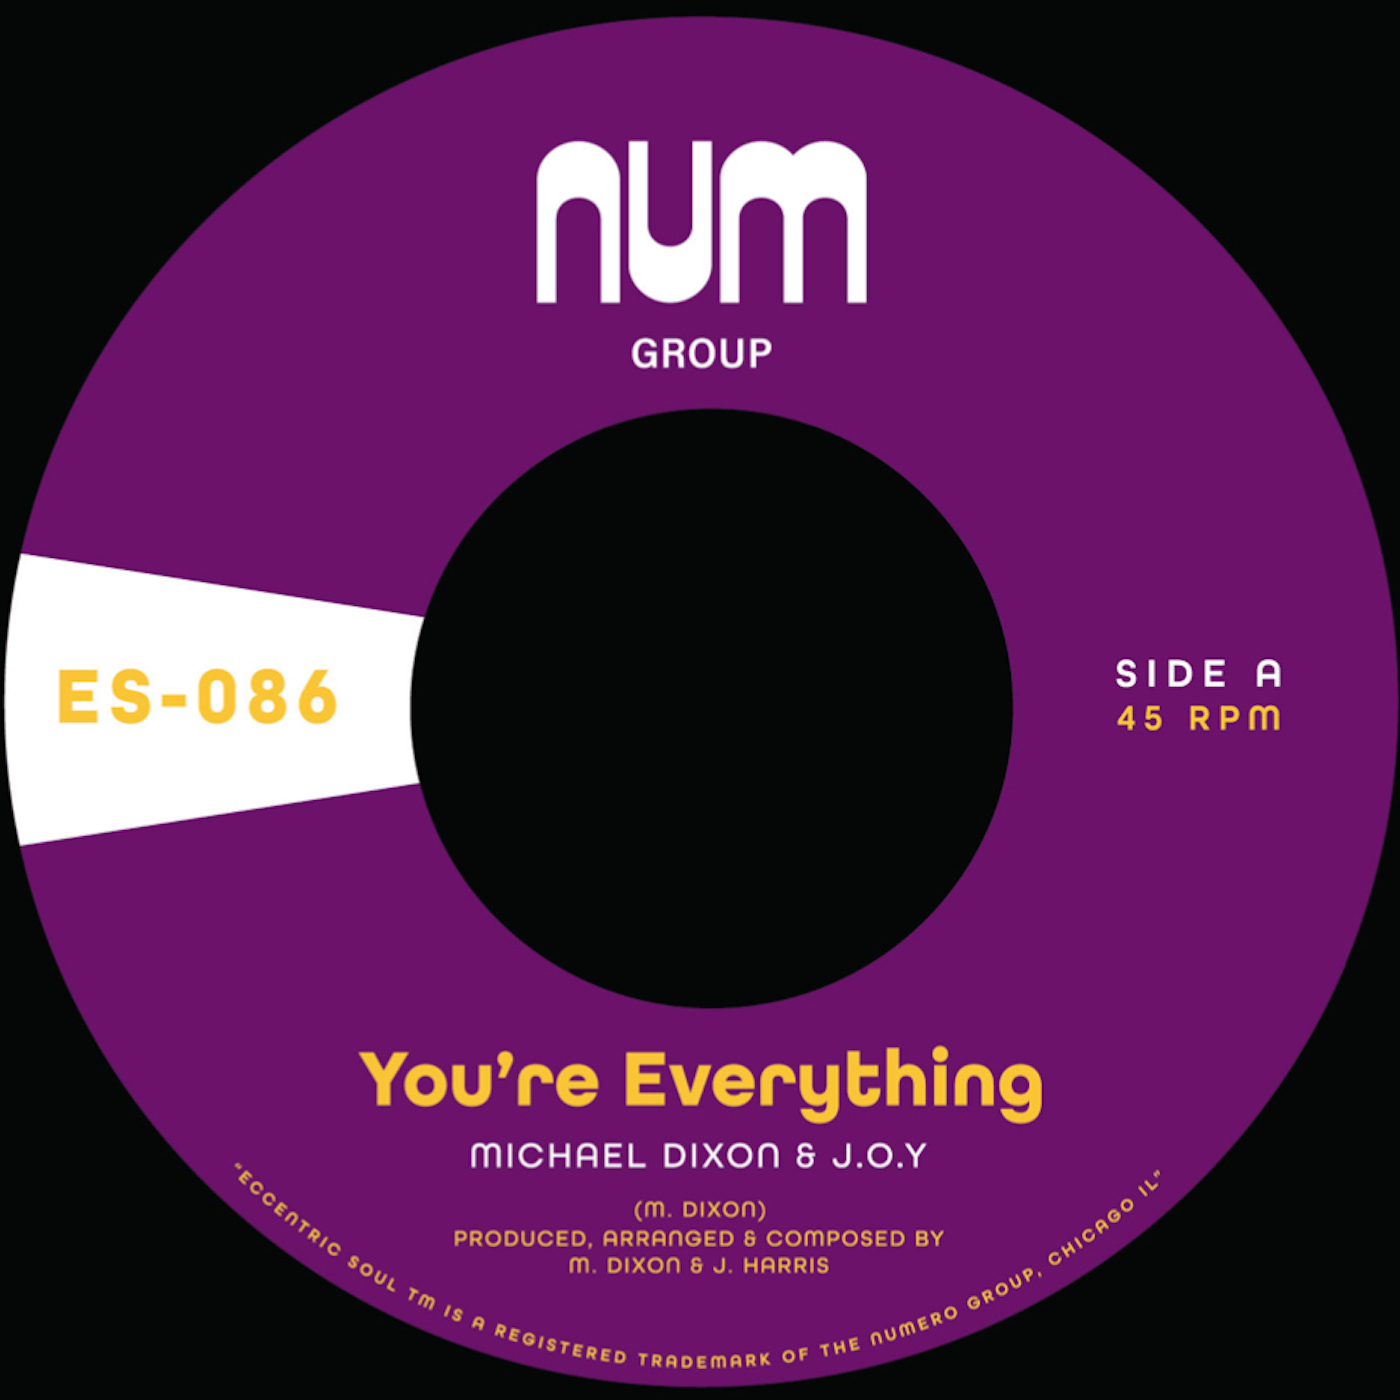 Michael A. Dixon & JOY - You're Everything b/w You're All I Need : 7inch